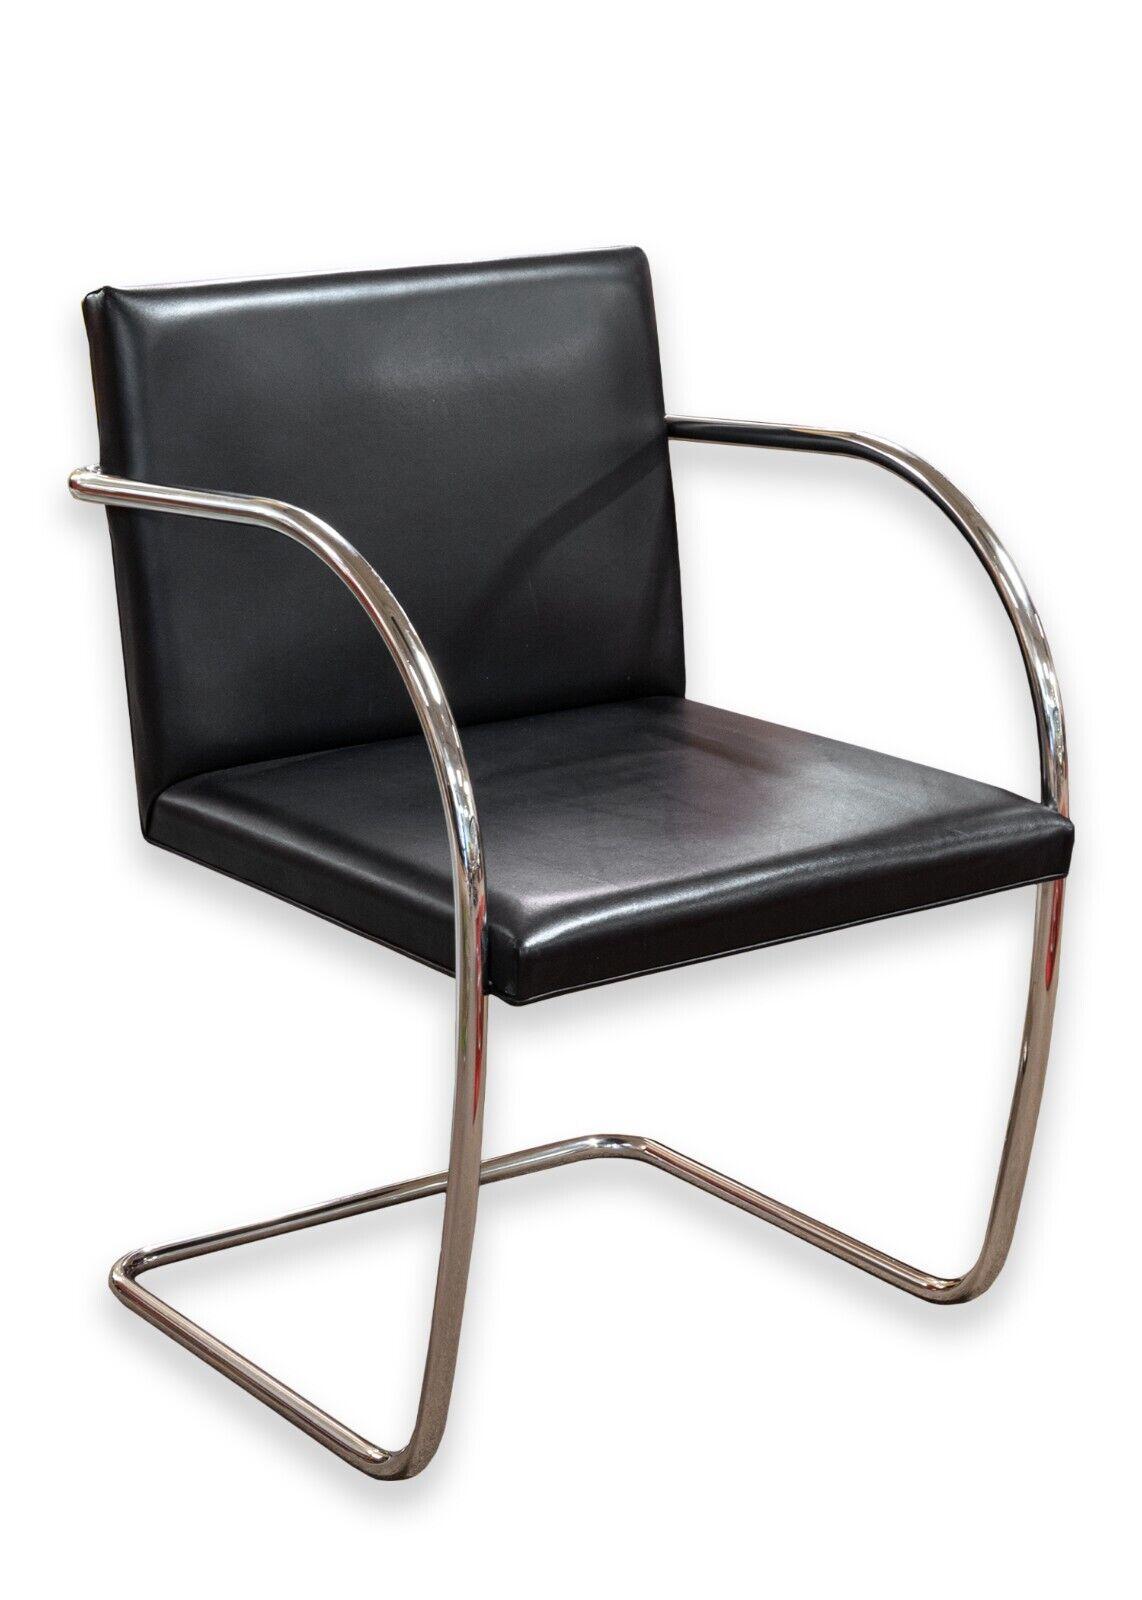 Set of 4 Mies van der Rohe for Knoll Tubular Black Leather Brno MCM Chairs In Good Condition For Sale In Keego Harbor, MI